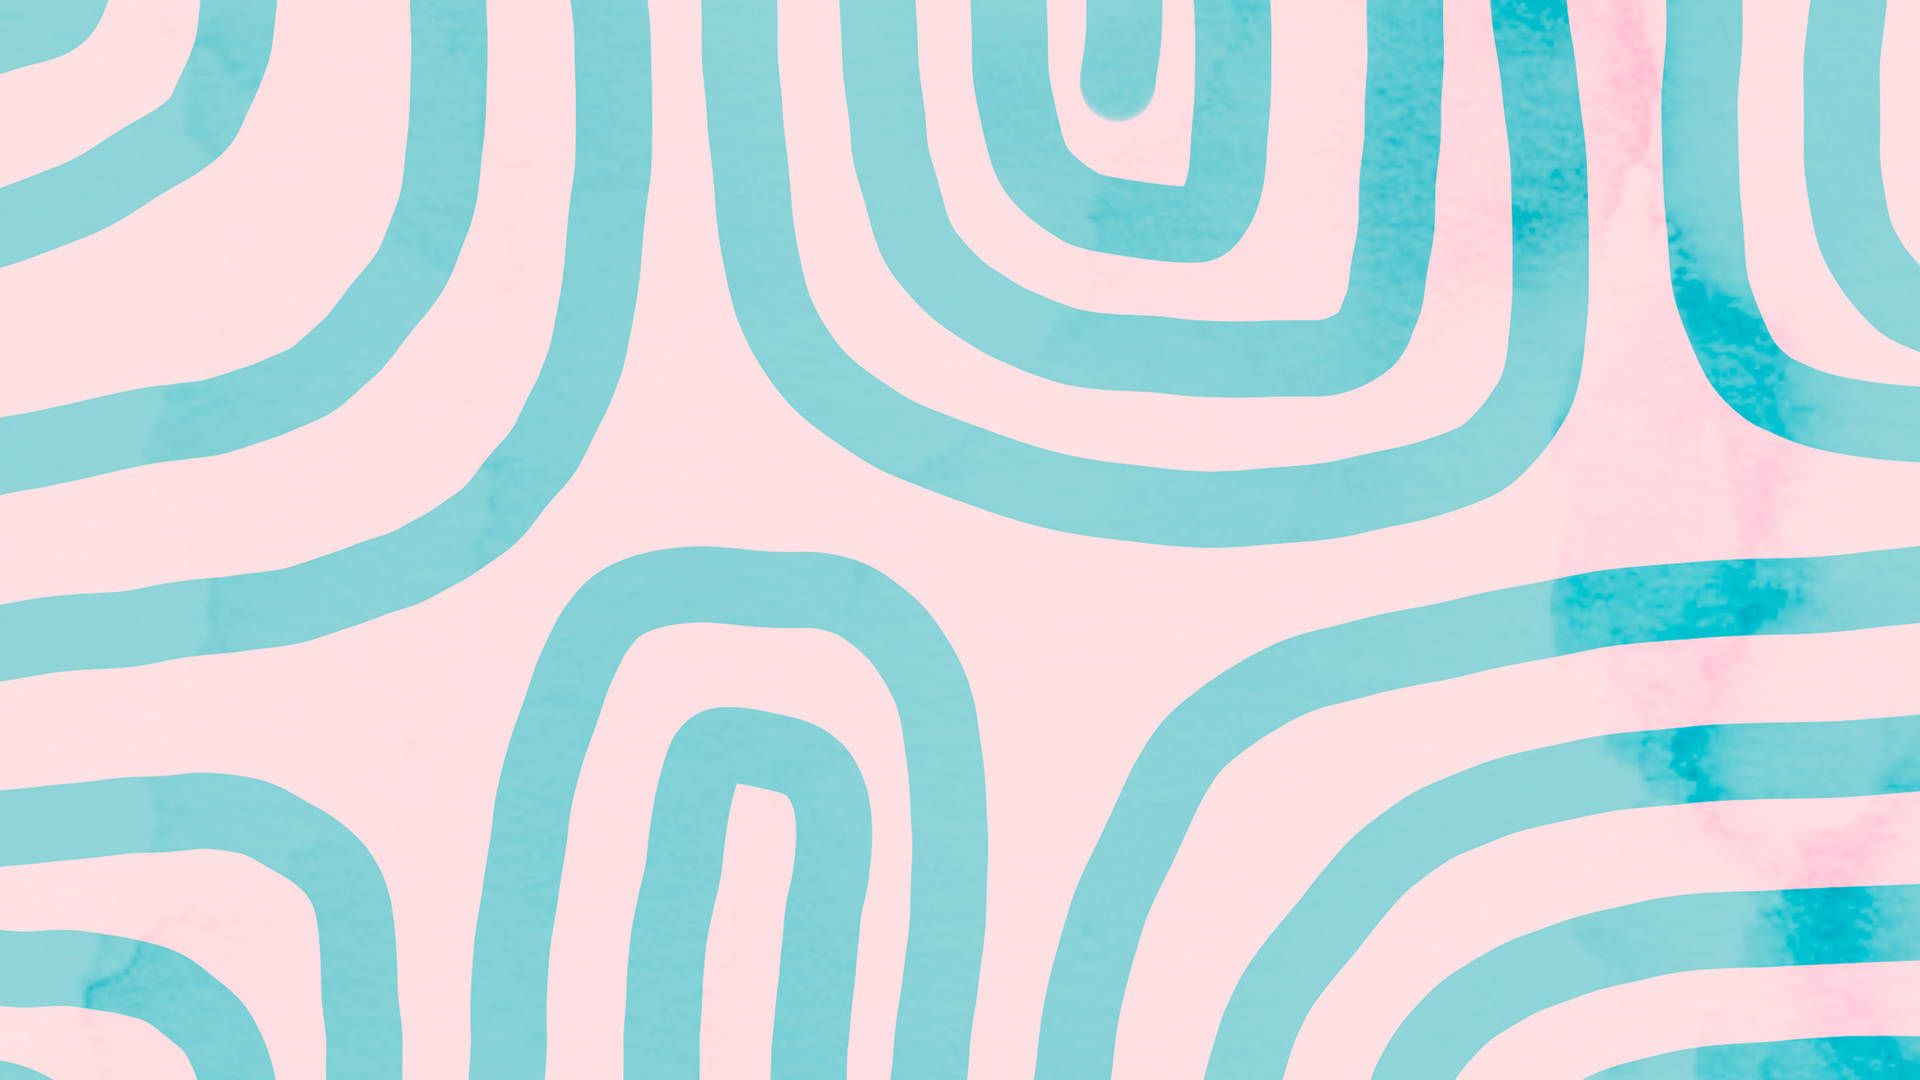 A blue and pink pattern on white - Abstract